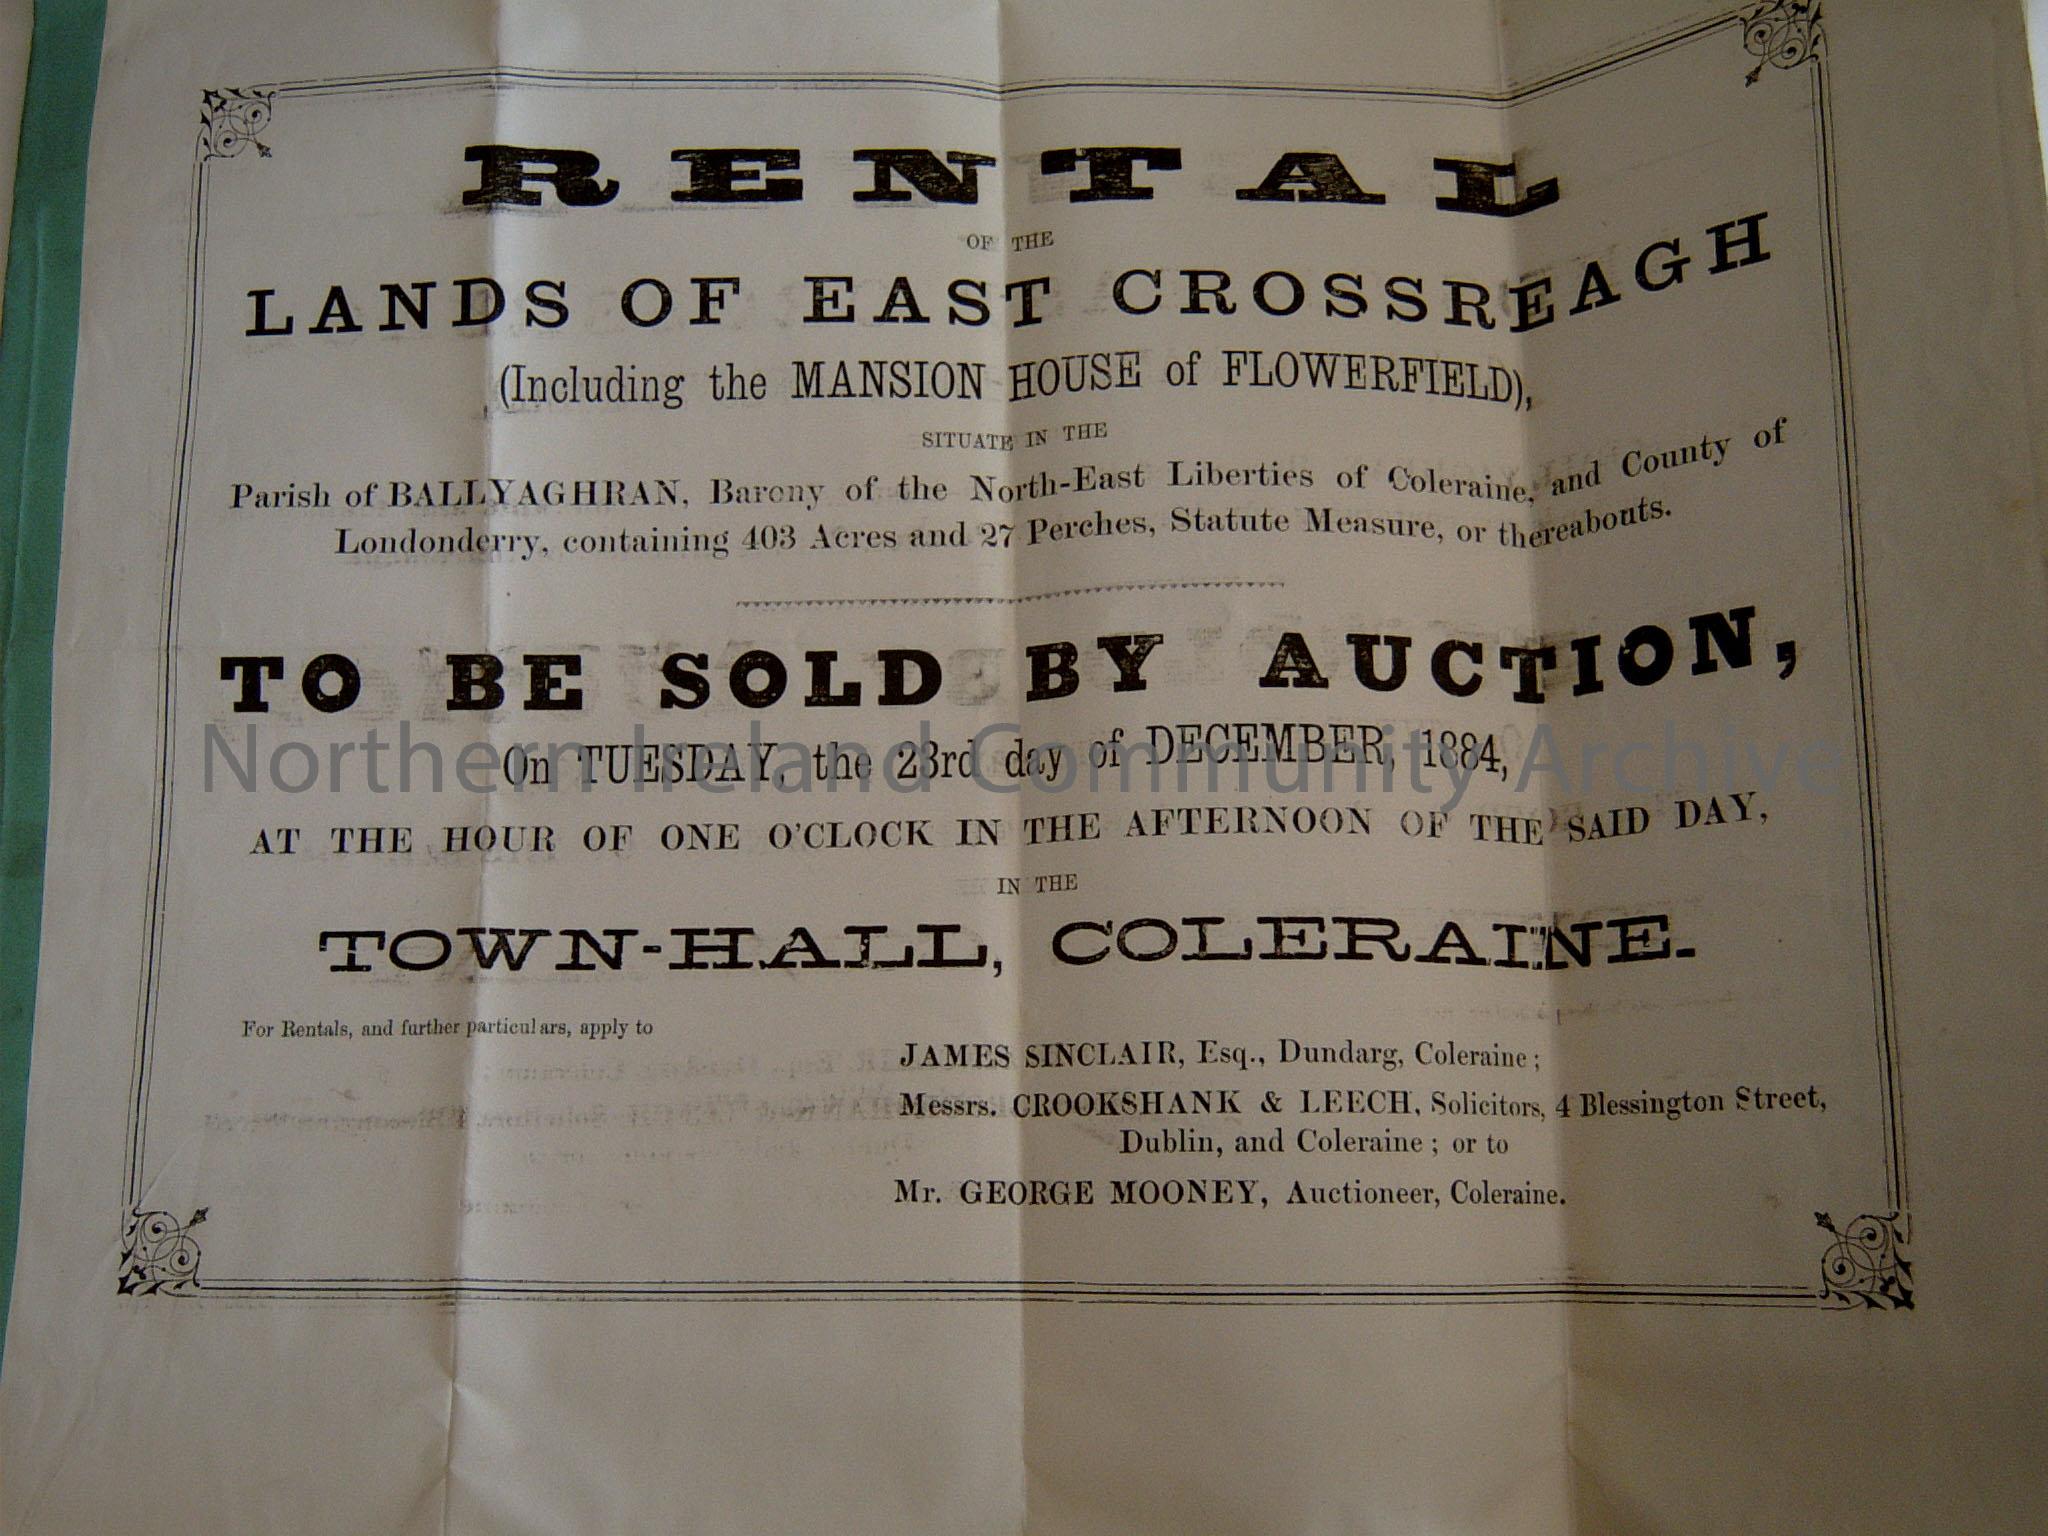 Rental and Particulars in the Parish of Ballyaghran, Barony of the Northe-East Liberties of Coleraine and County Londonderry.